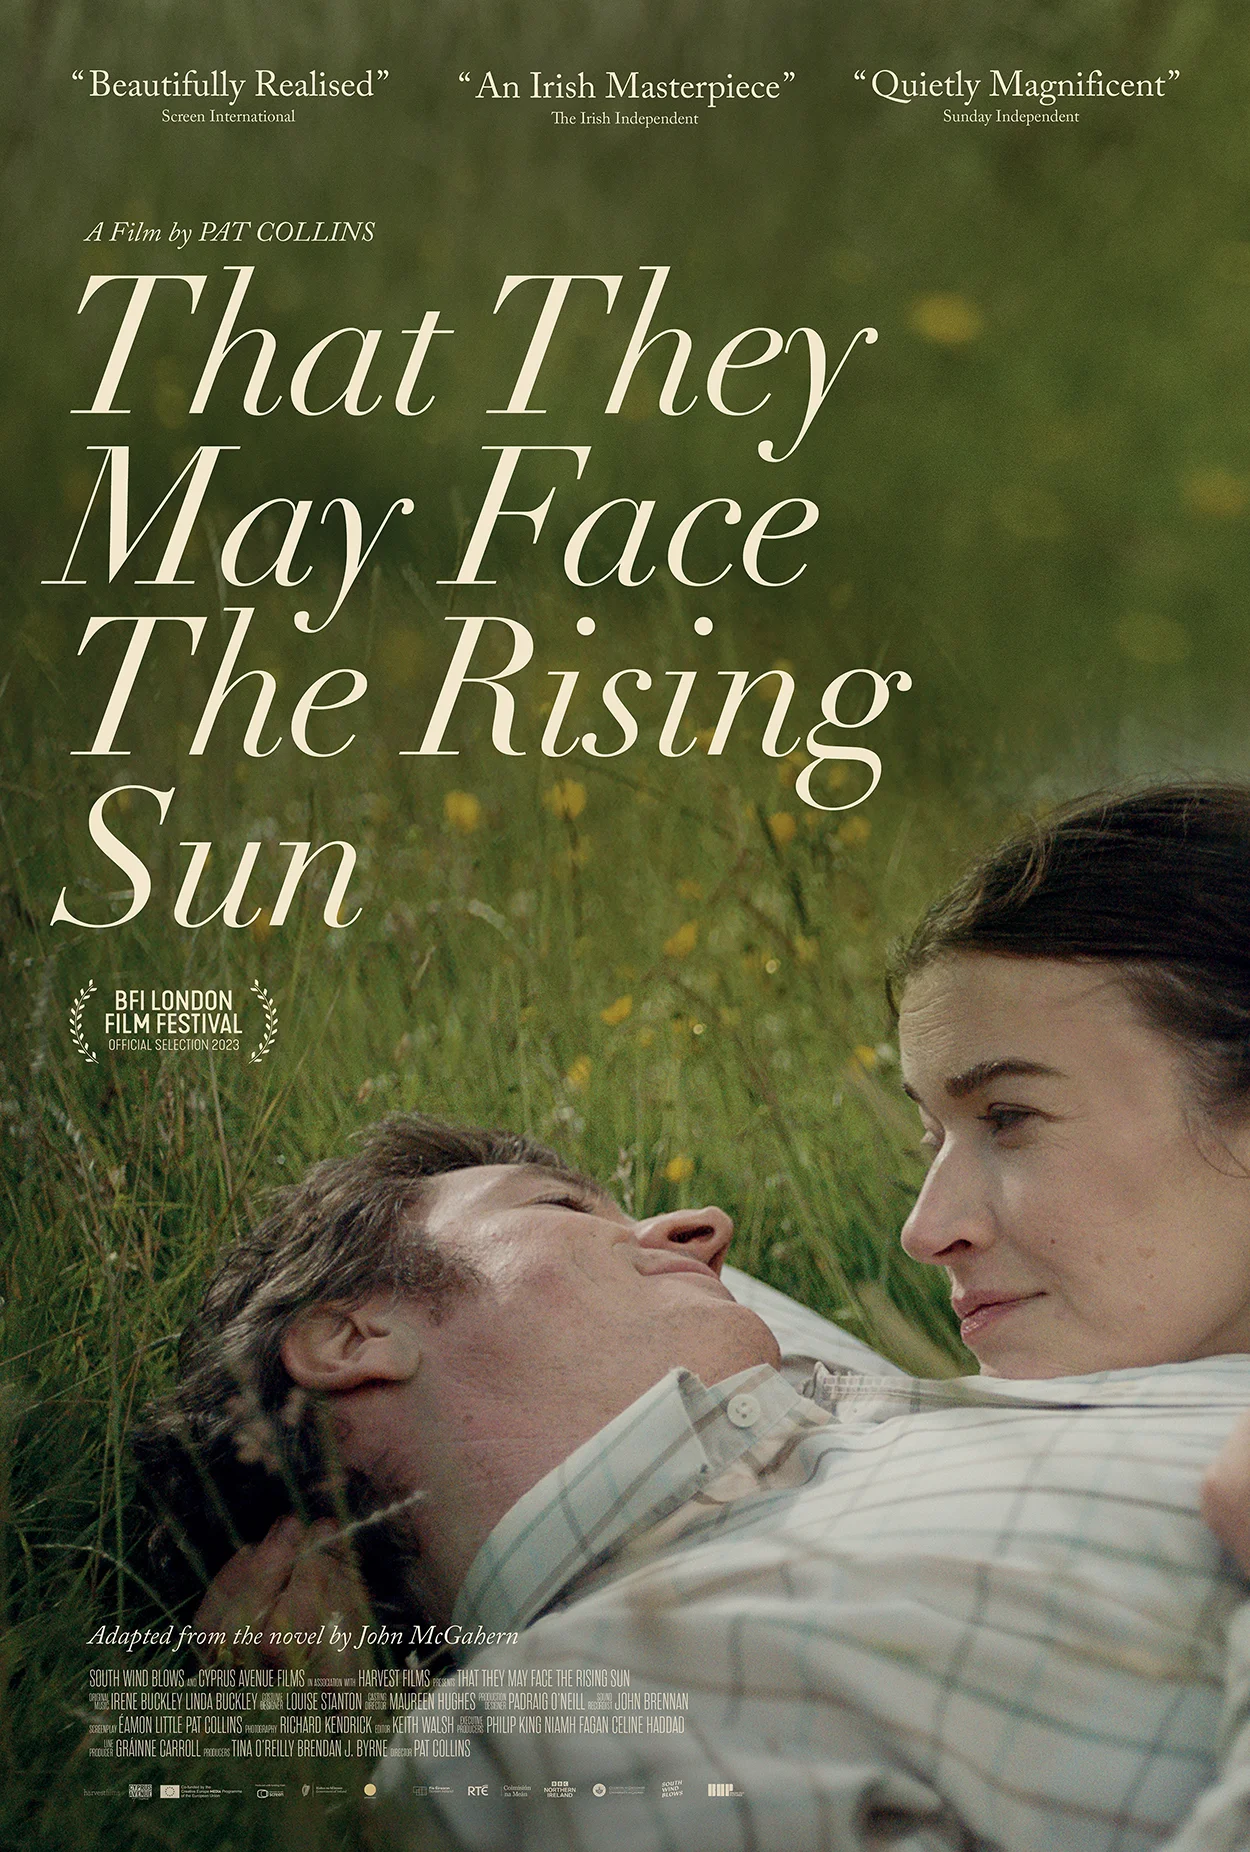 Silver Screen: That They May Face The Rising Sun